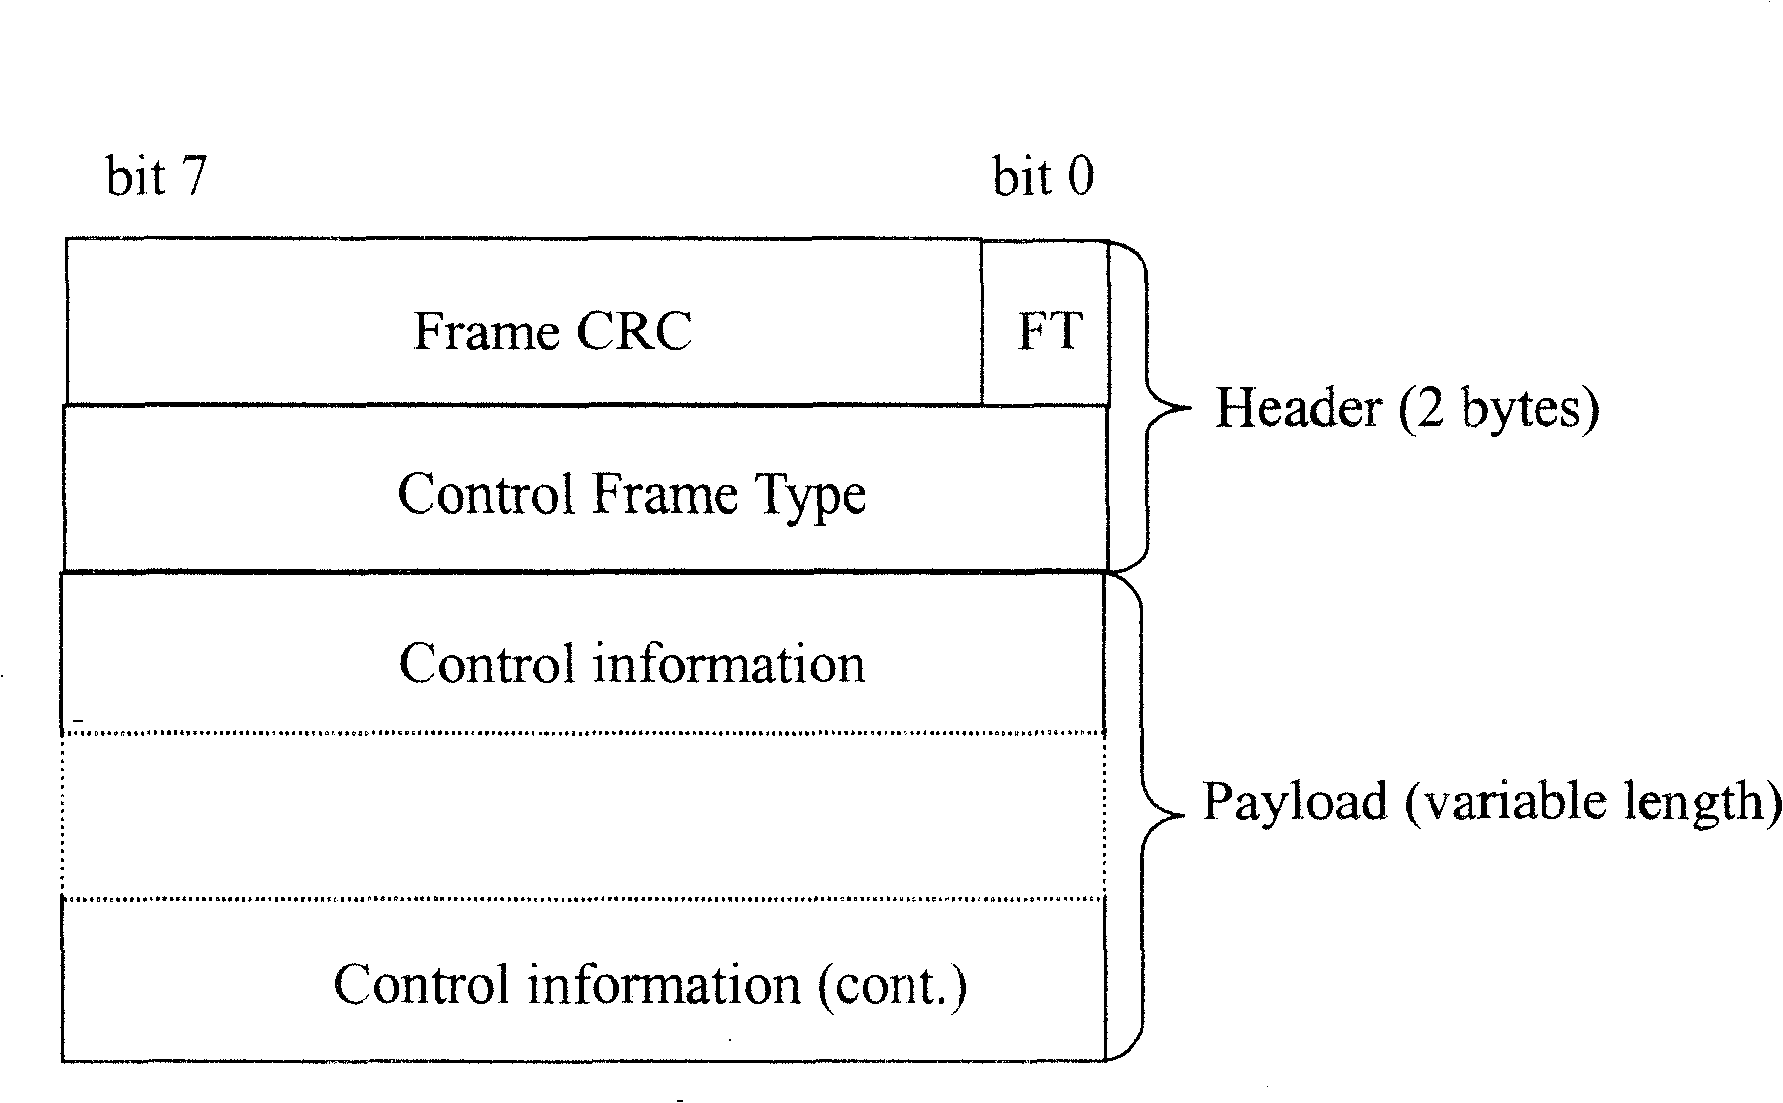 High-speed downlink packet access service scheduling method